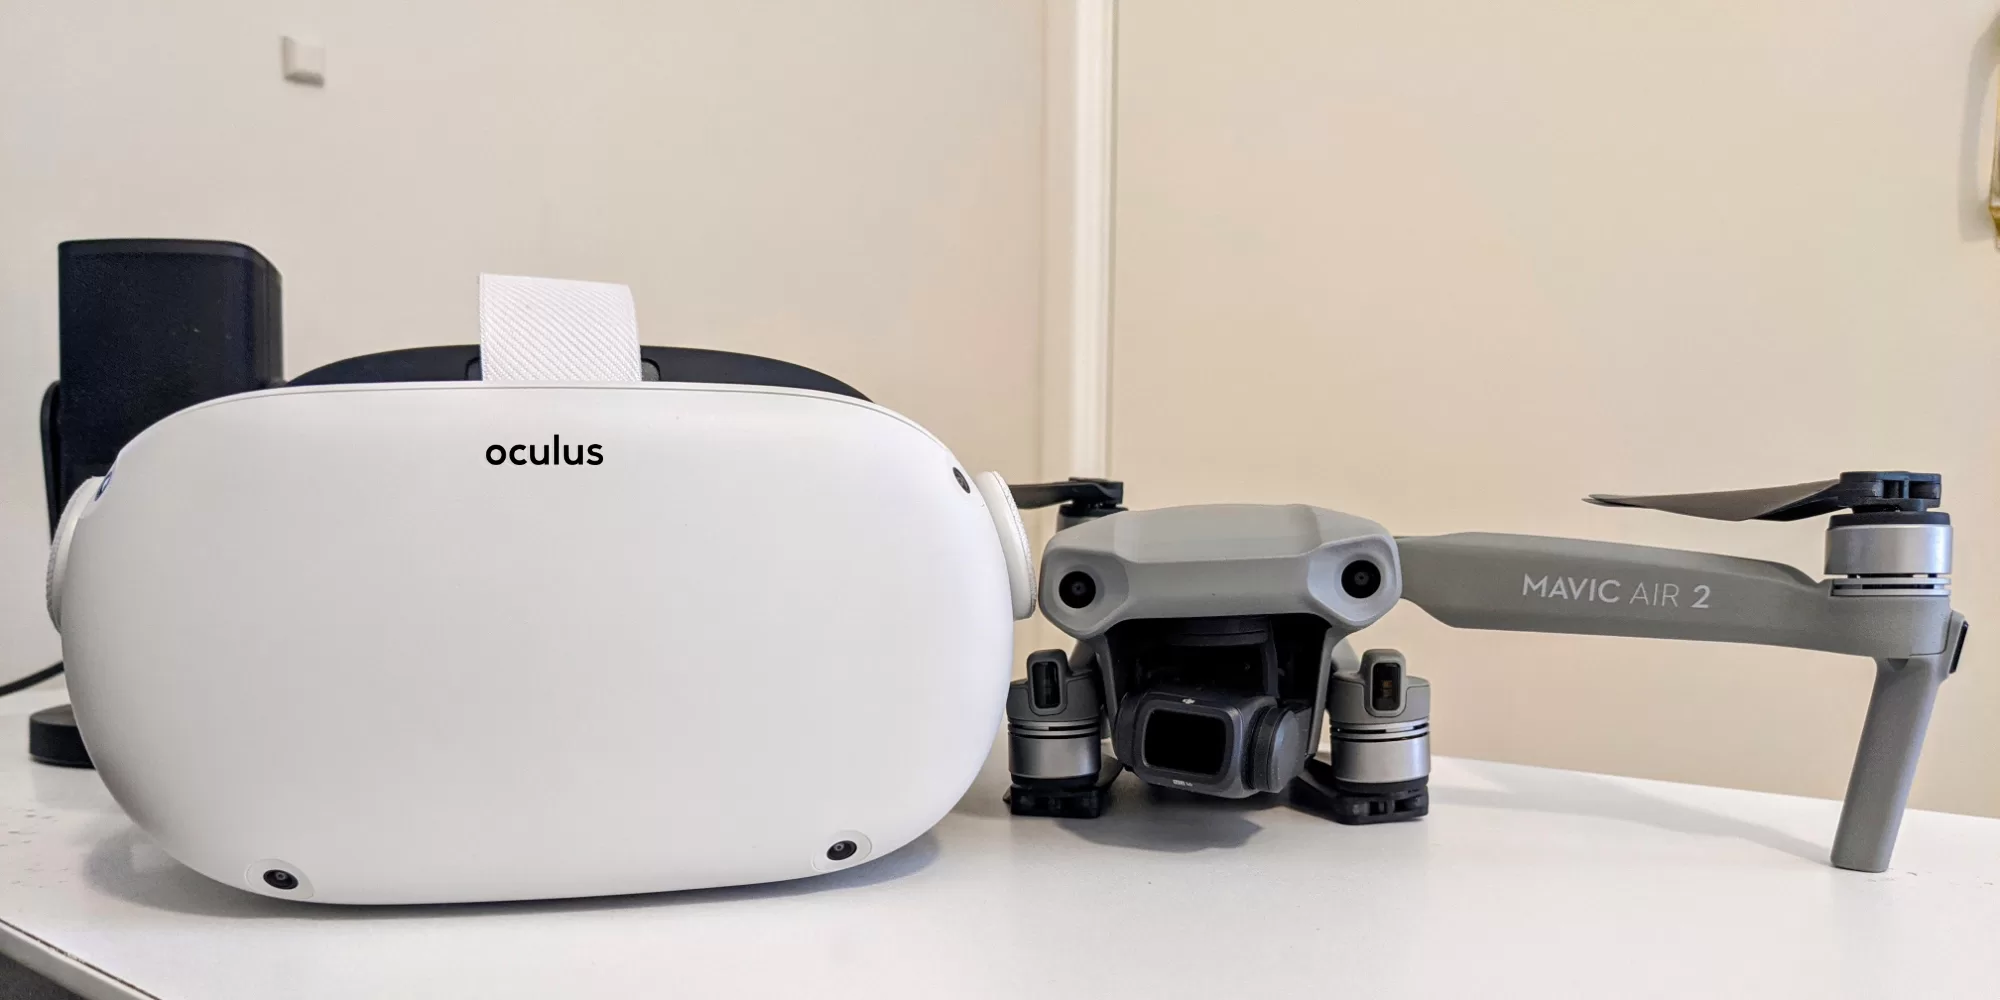 Turn your Oculus Quest 2 into a VR headset for your DJI drone